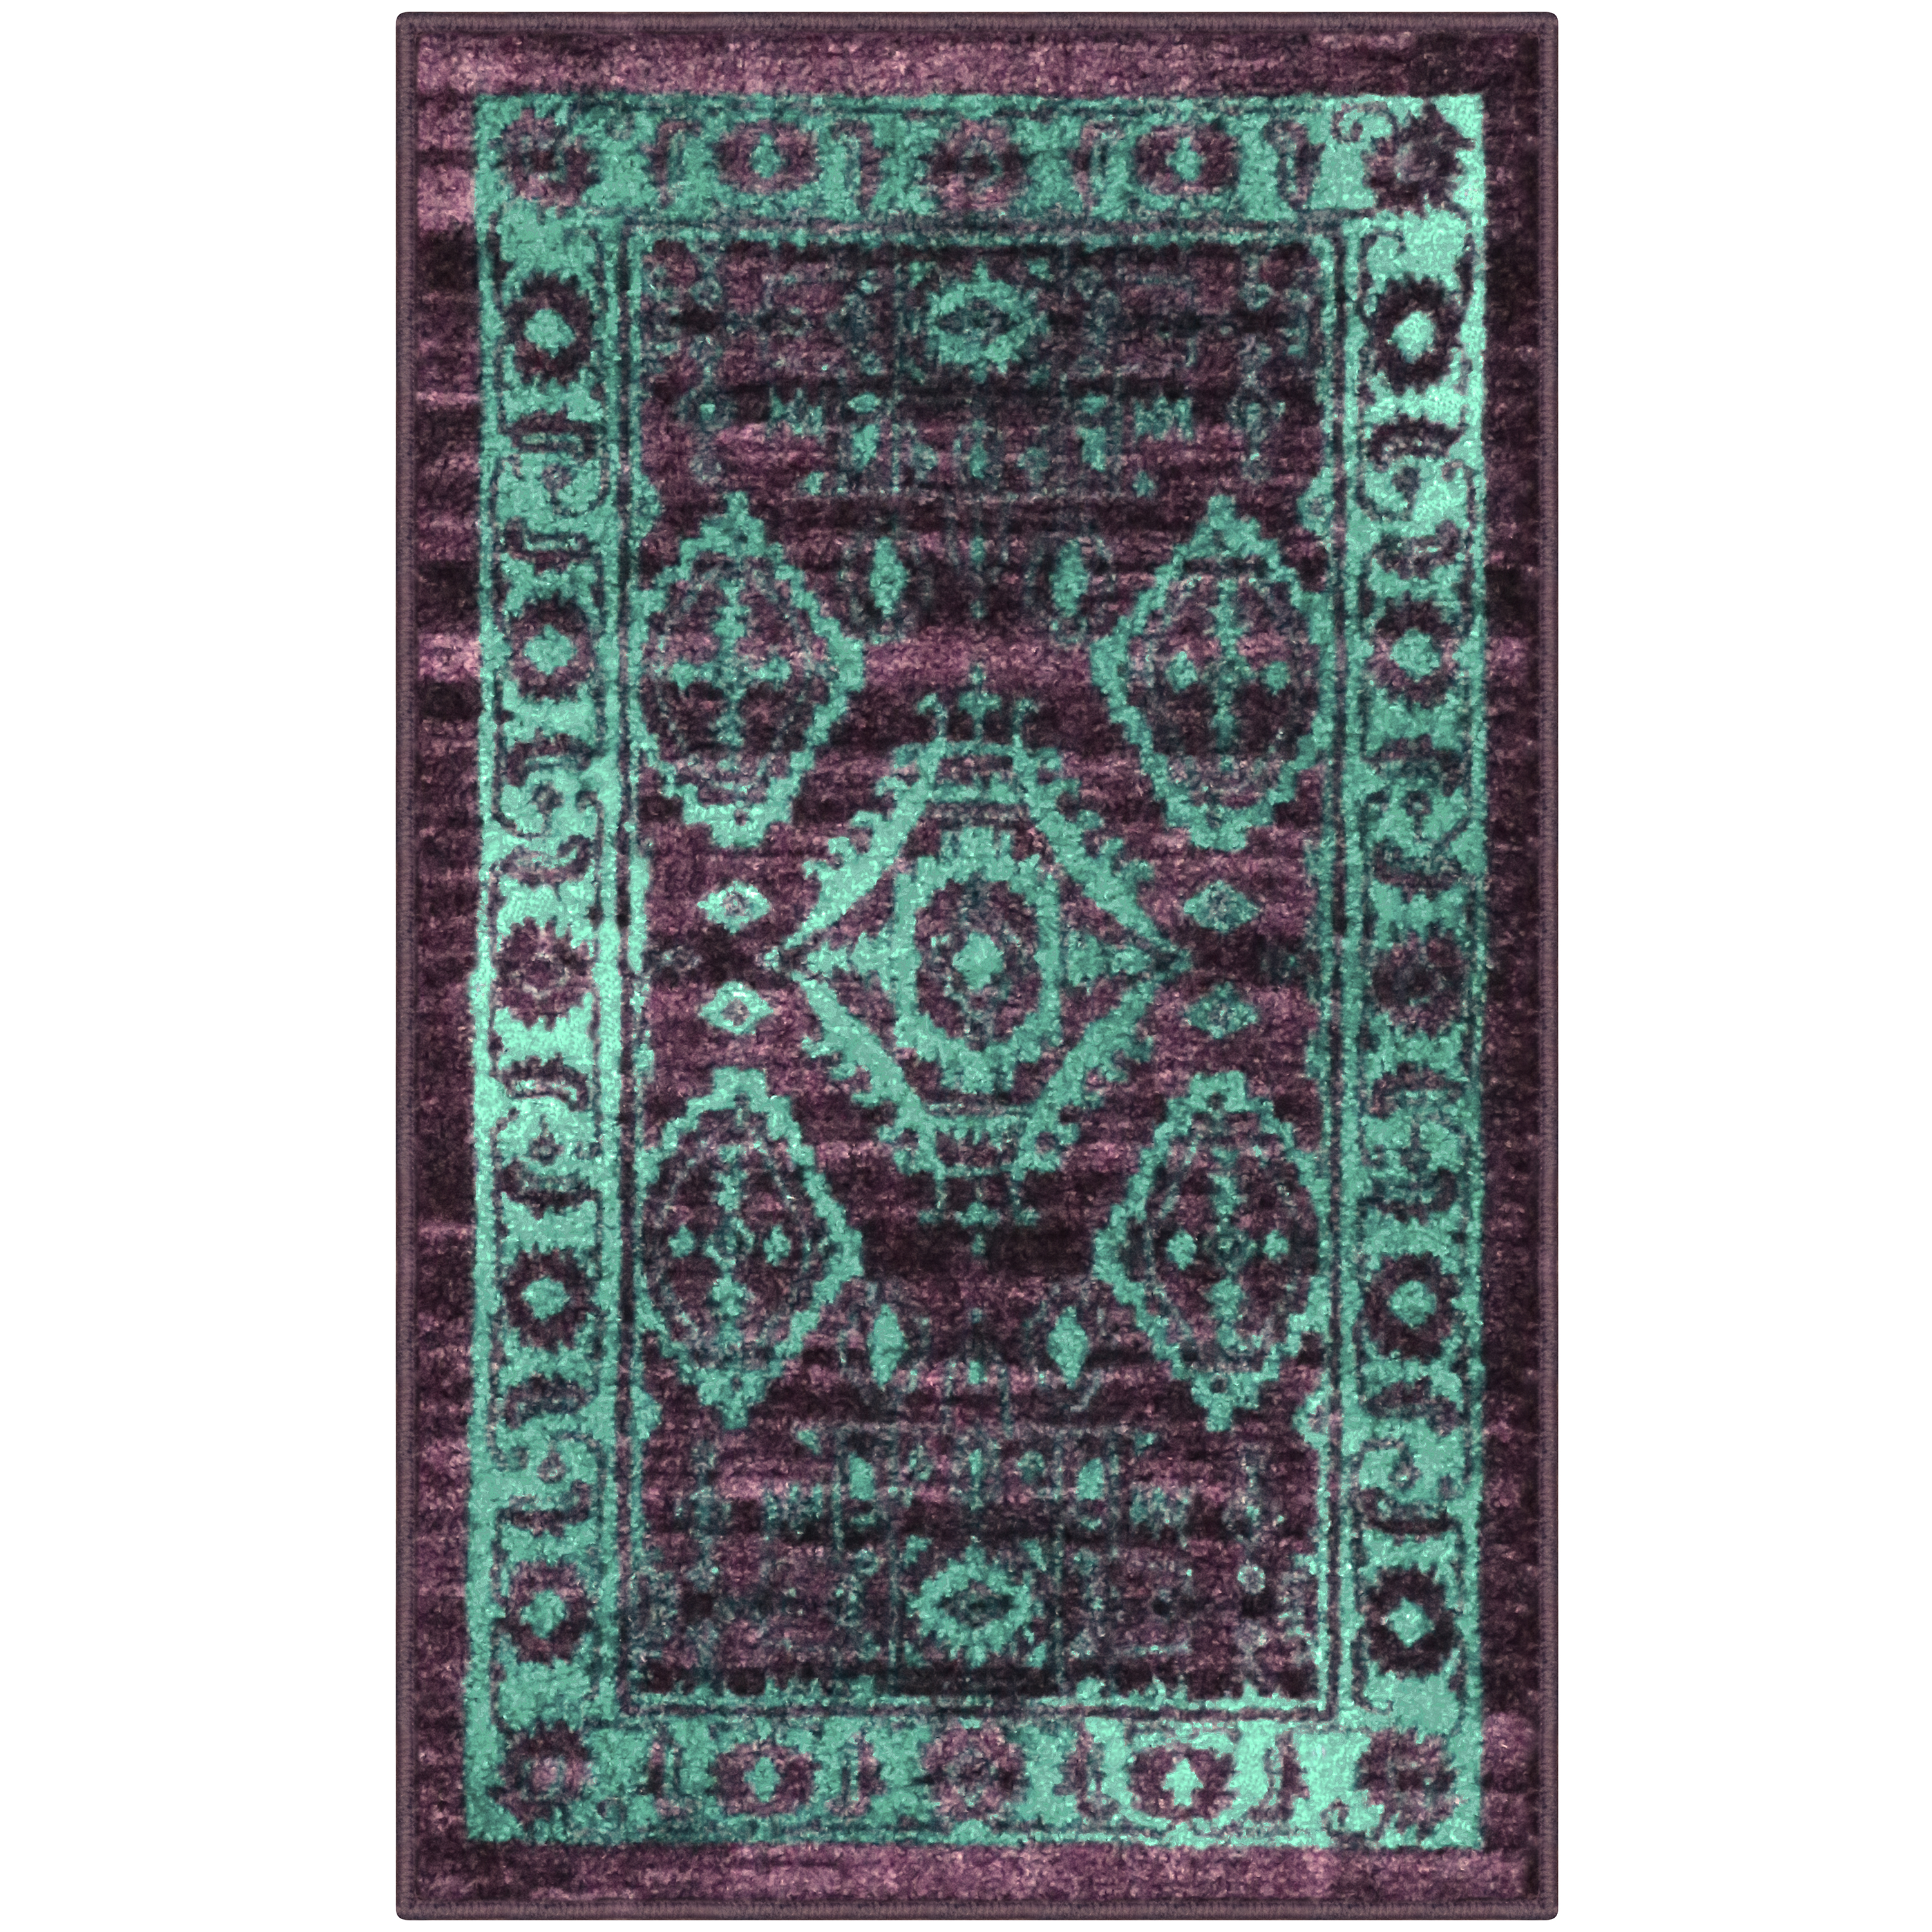 Maples Rugs Global Arya Indoor Entryway Accent Rug, Plum|Spa Green, 1'8"x2'10" - image 1 of 6